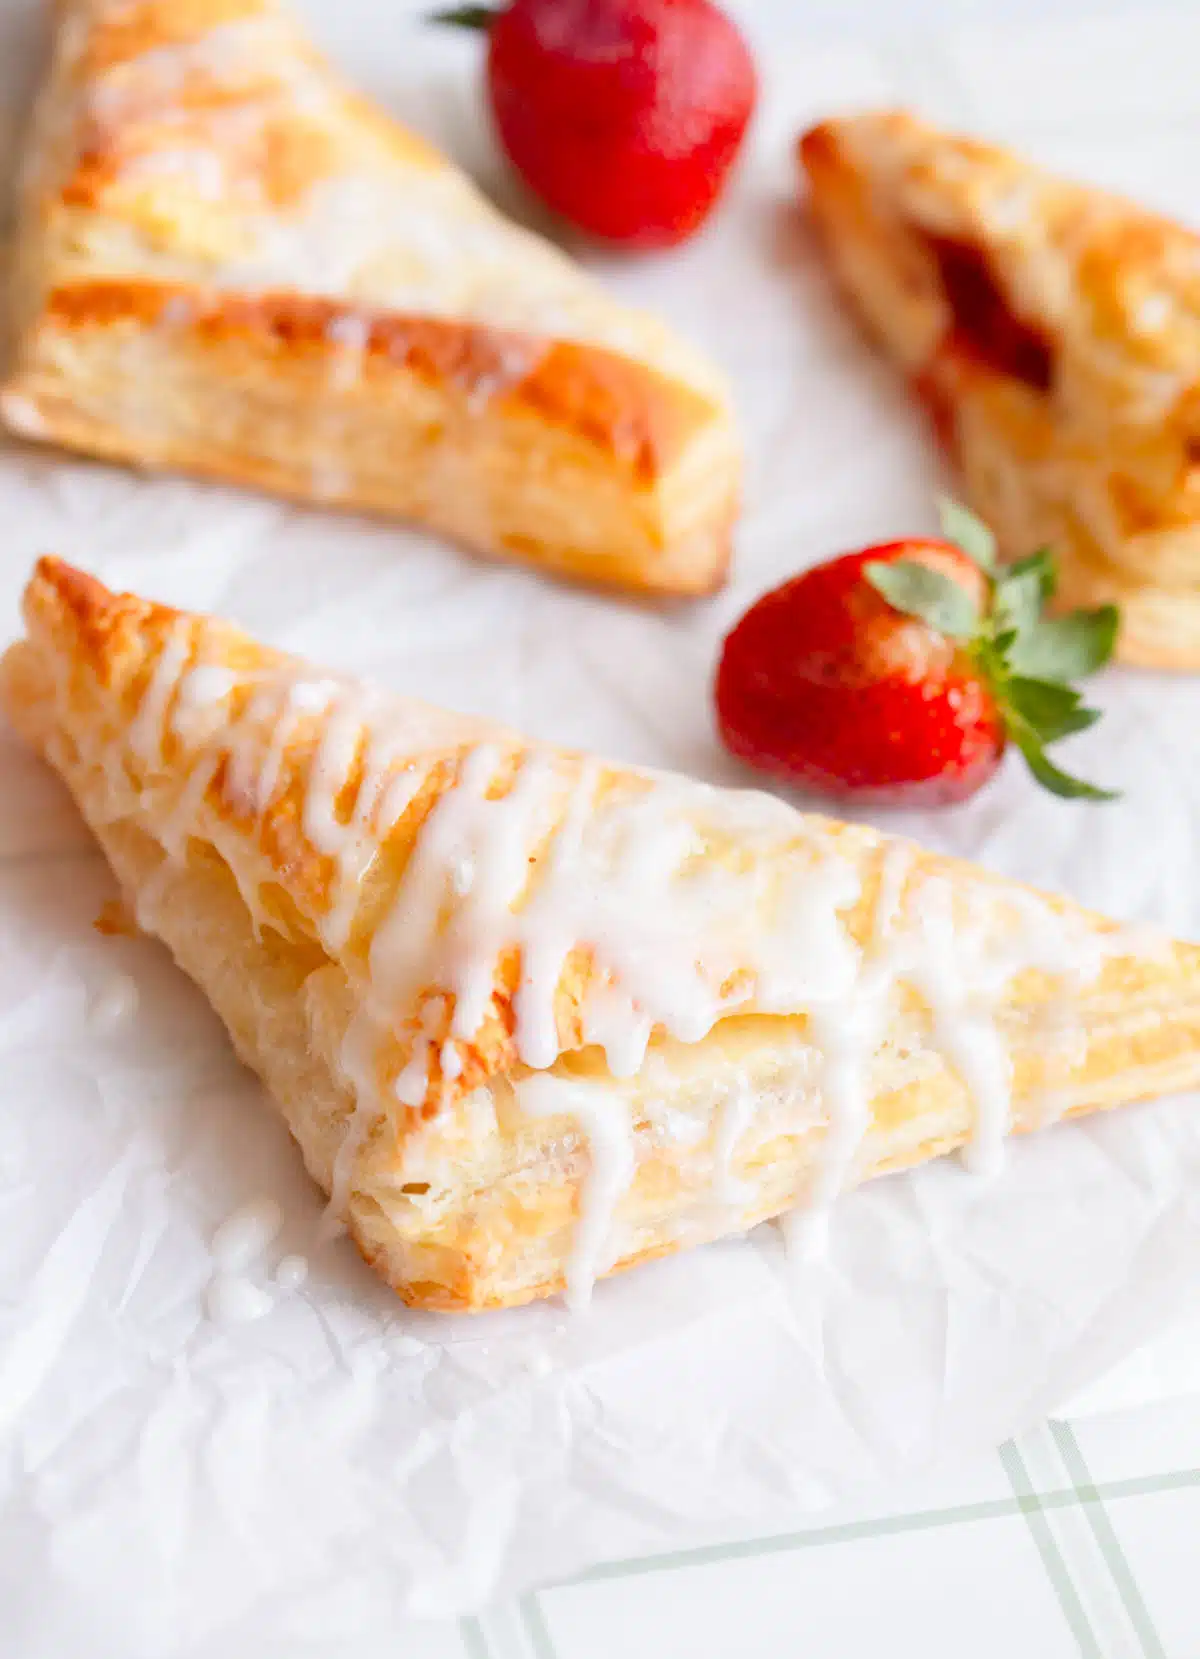 Strawberry Turnovers drizzled with a powdered sugar glaze on parchment paper with fresh strawberries in the background.